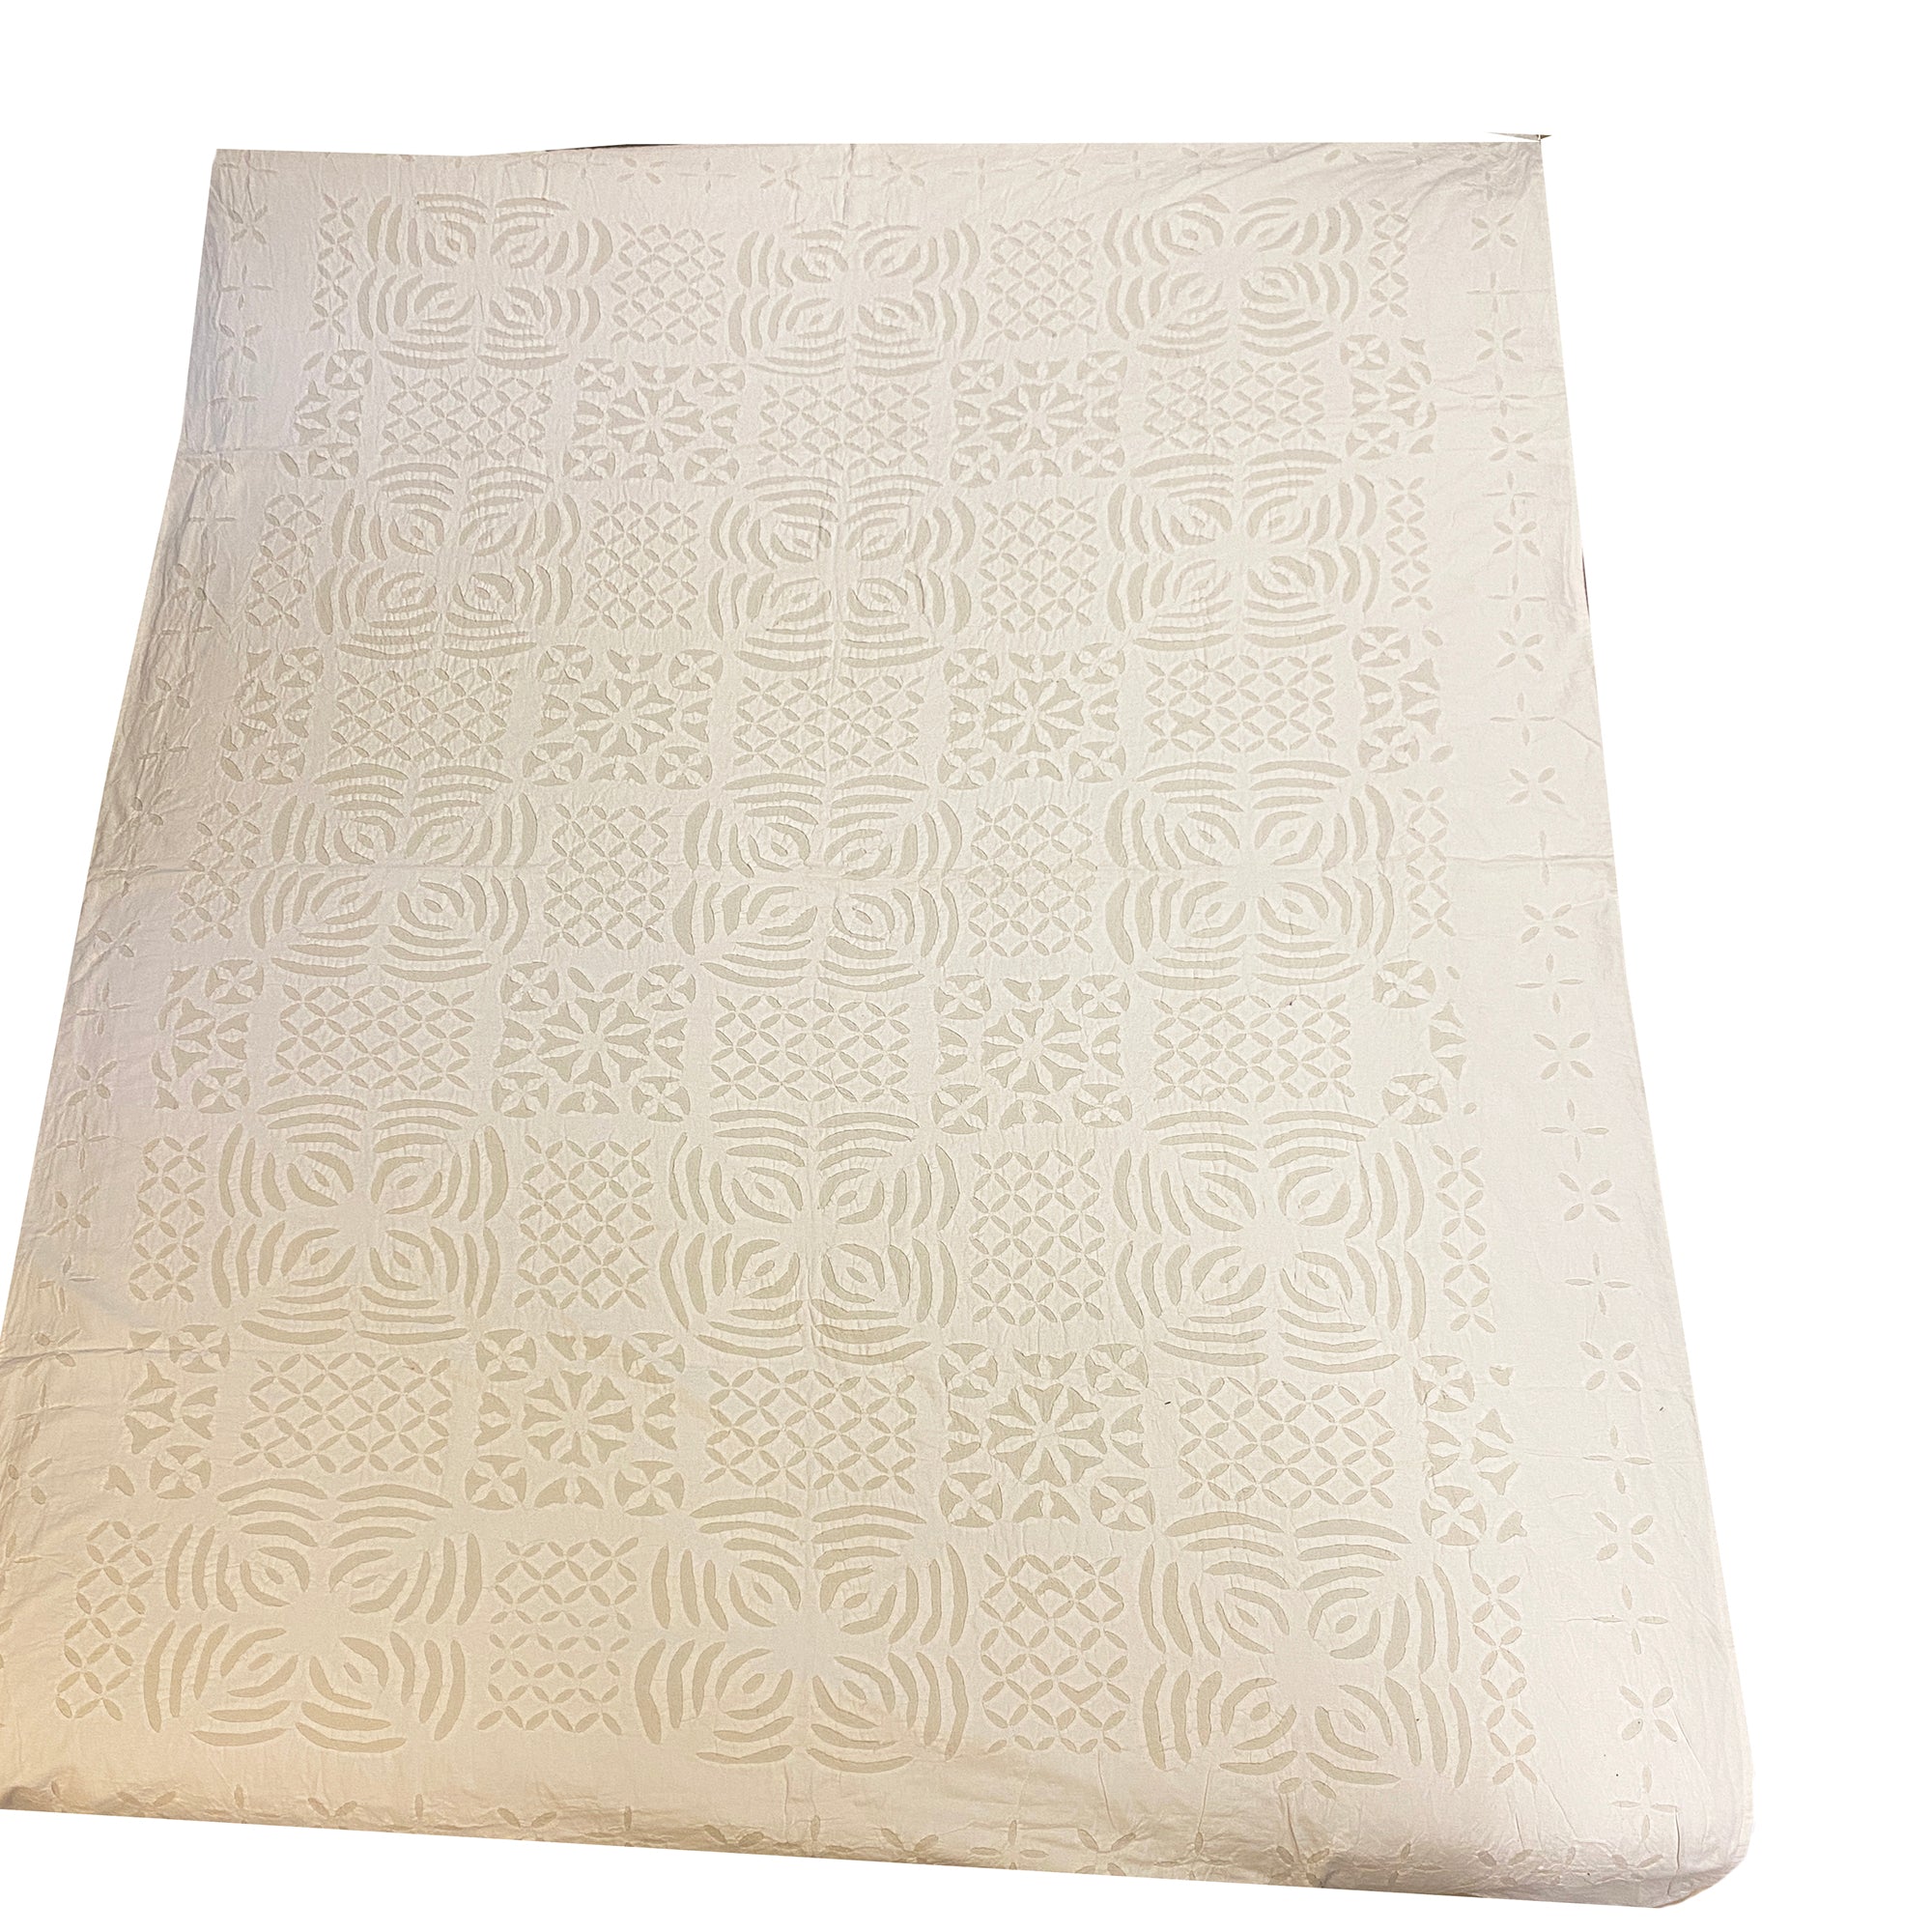 JM White Cut Out Bed Cover - Vintage India NYC